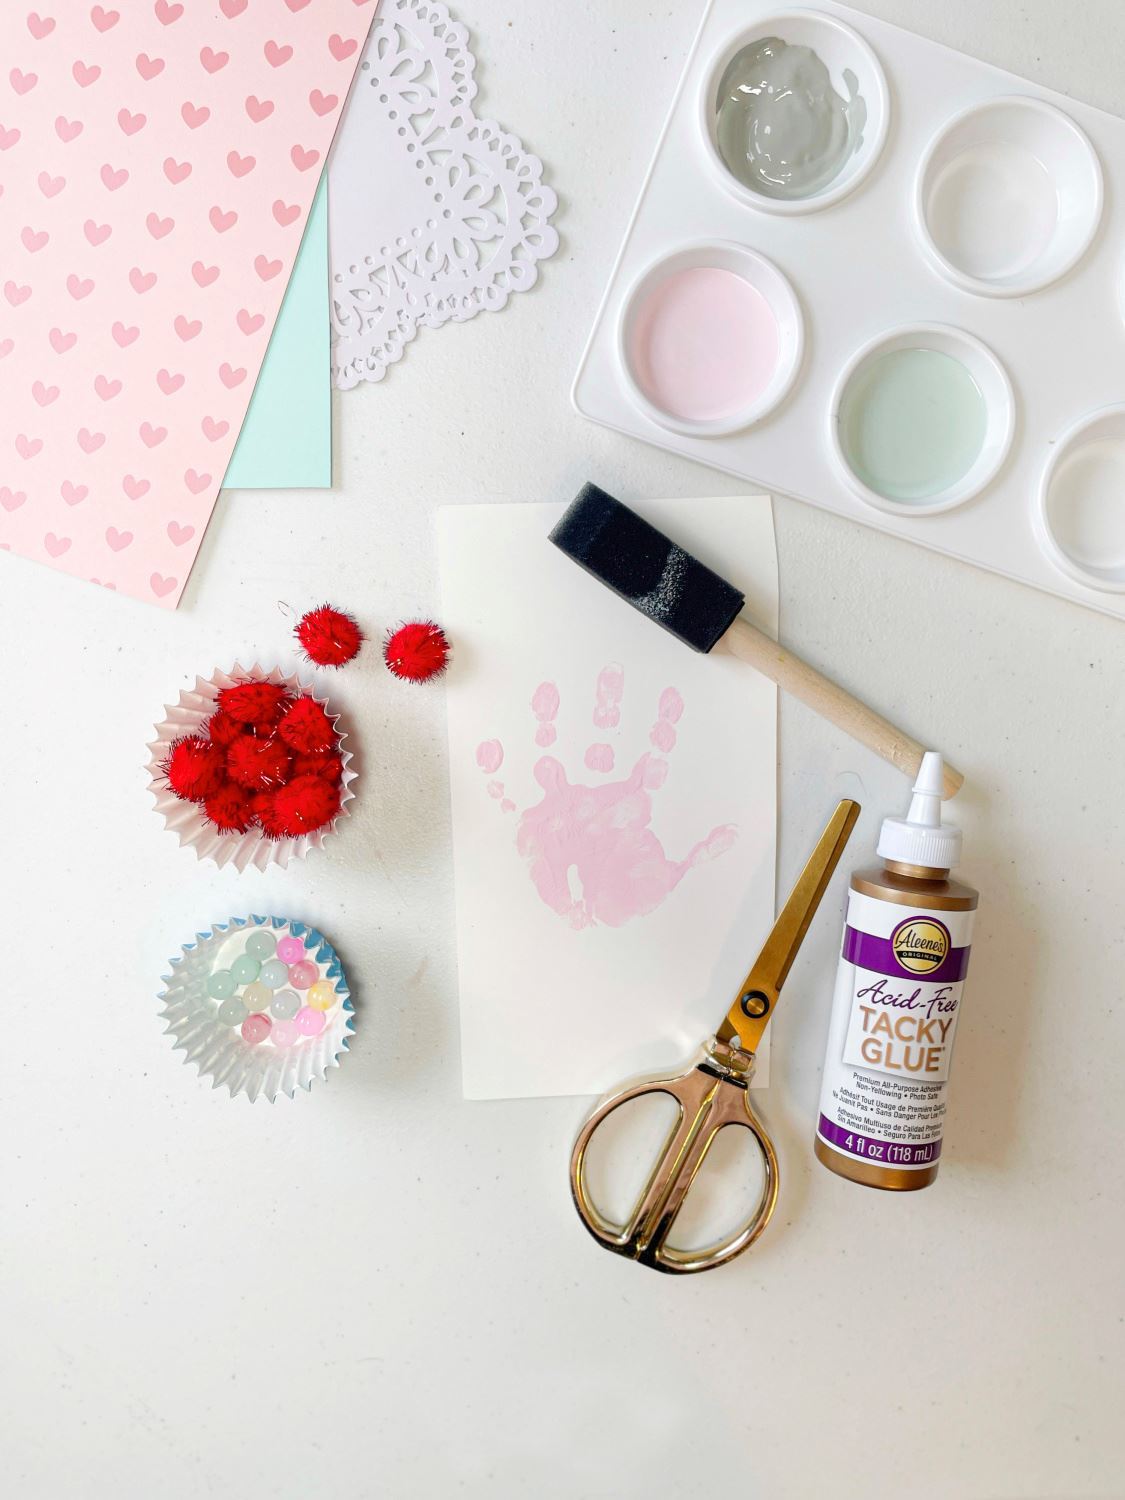 Press painted handprints onto white cardstock